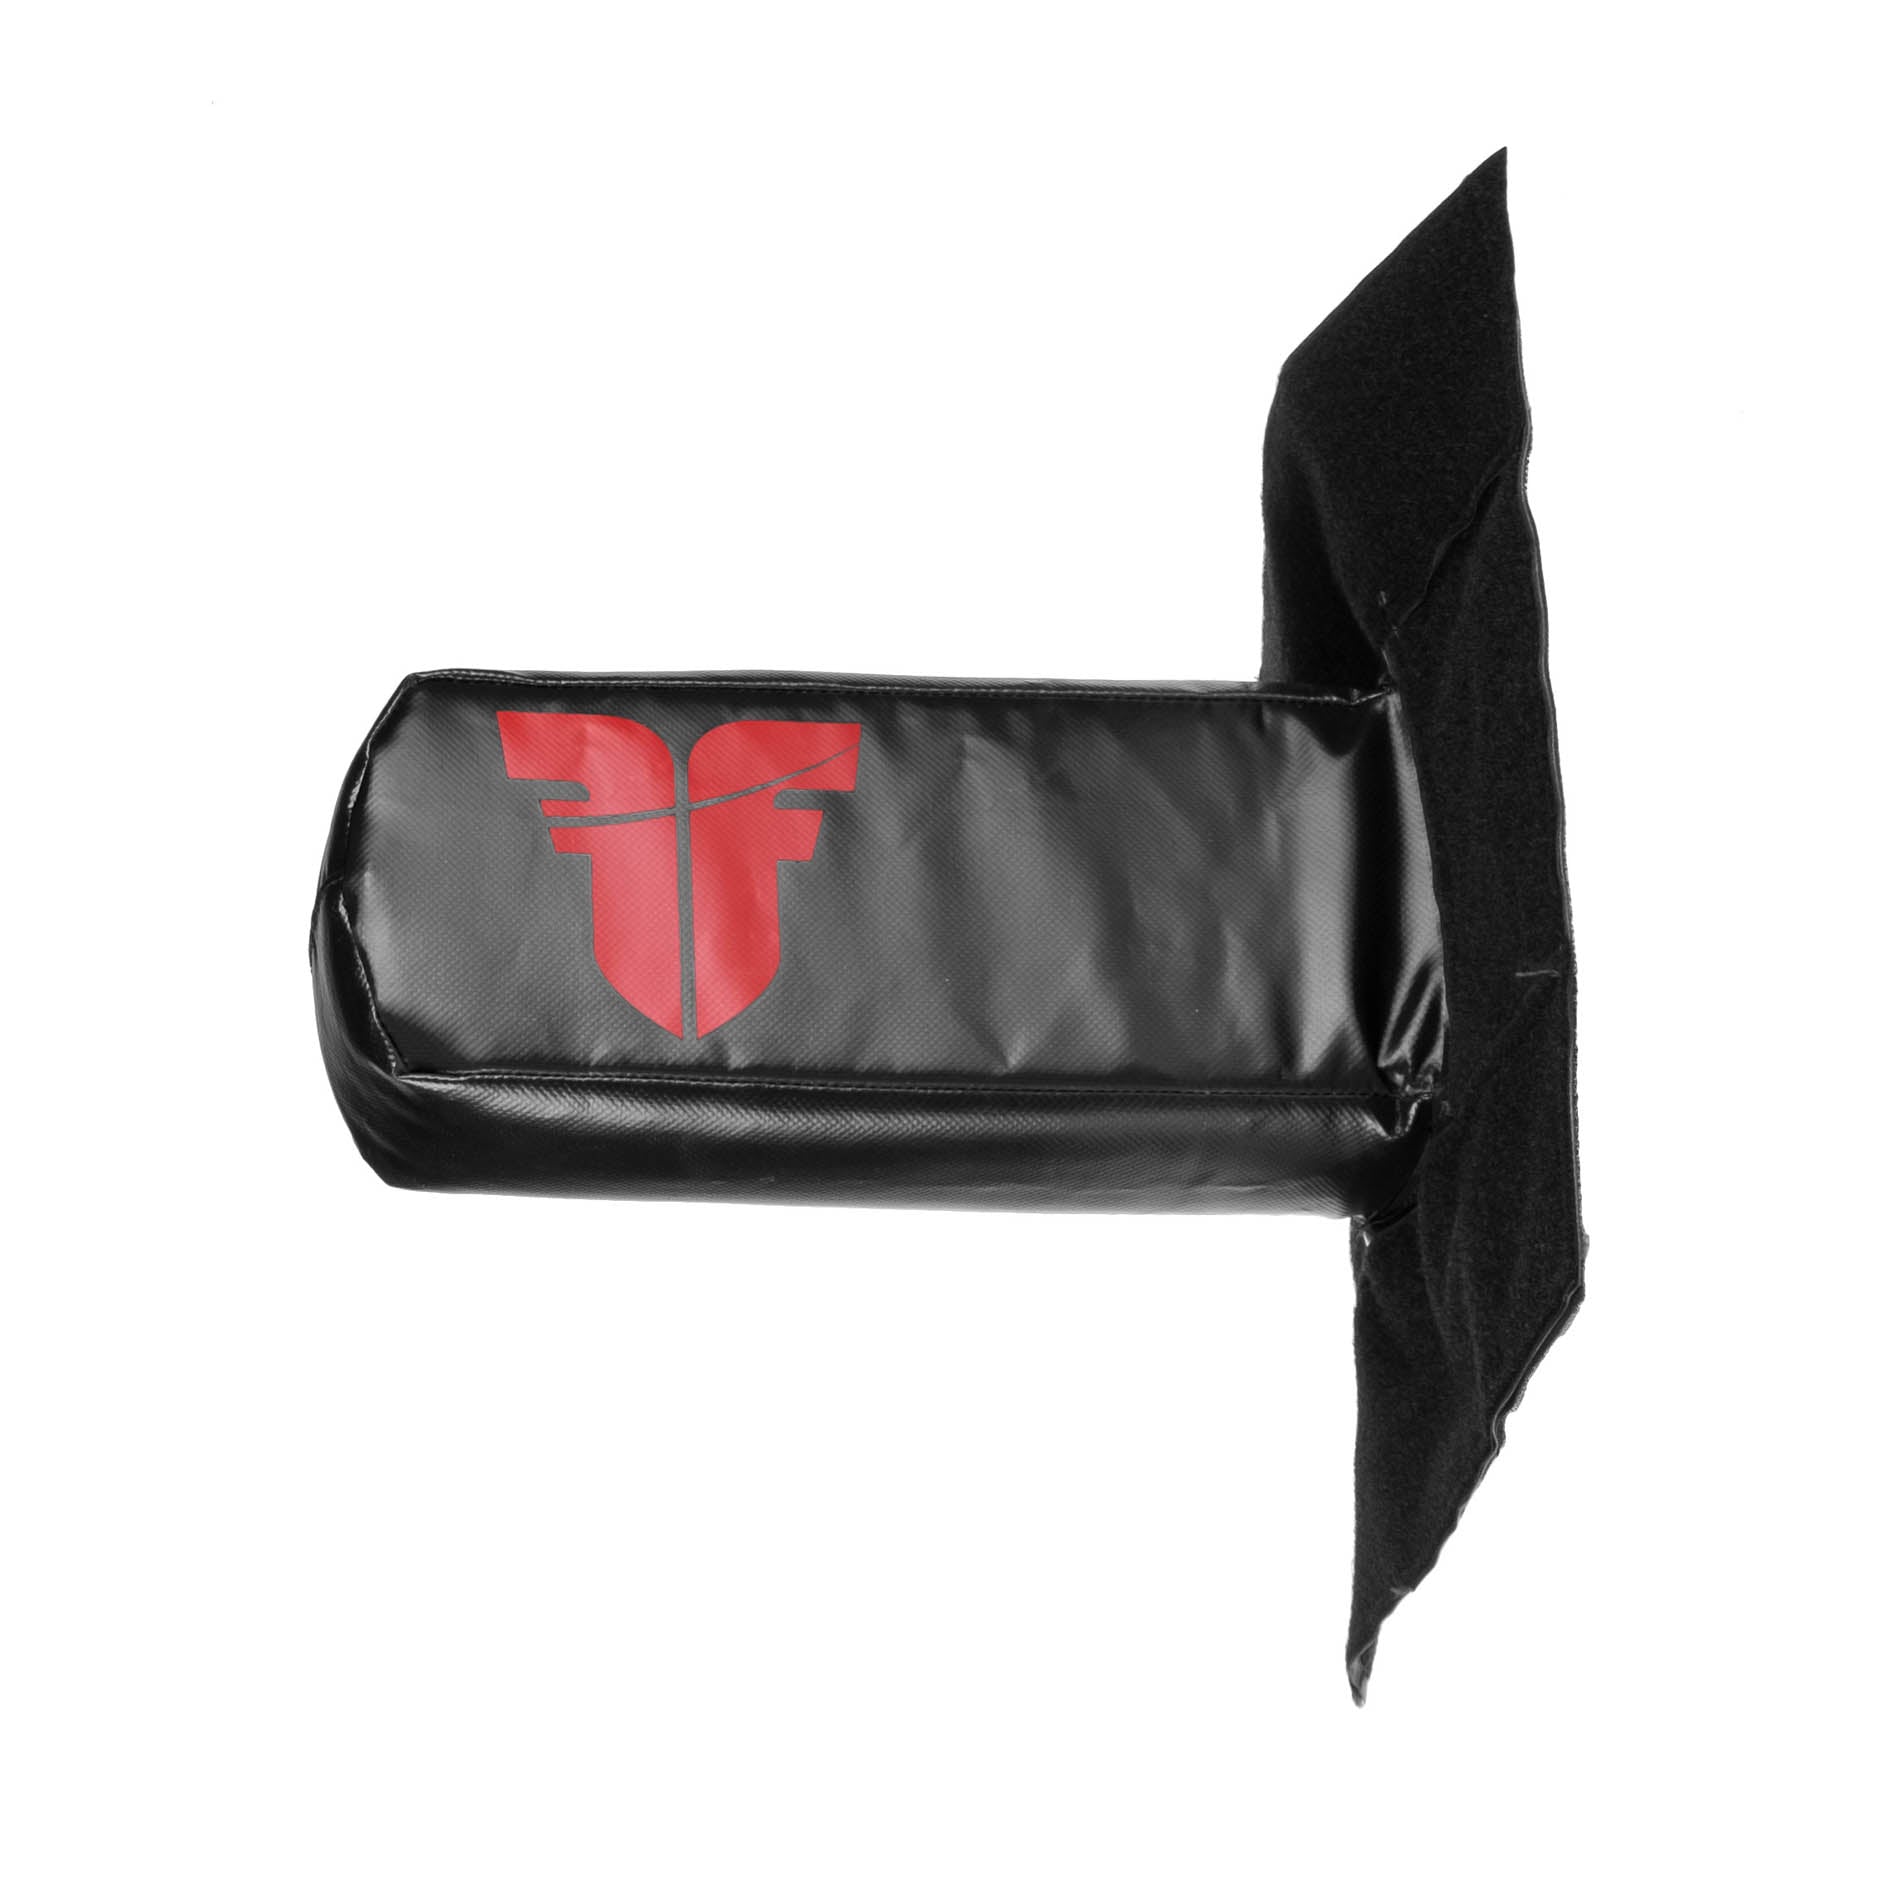 Fighter Arm Target M for Power Wall - black/red, FPWS-08-BR